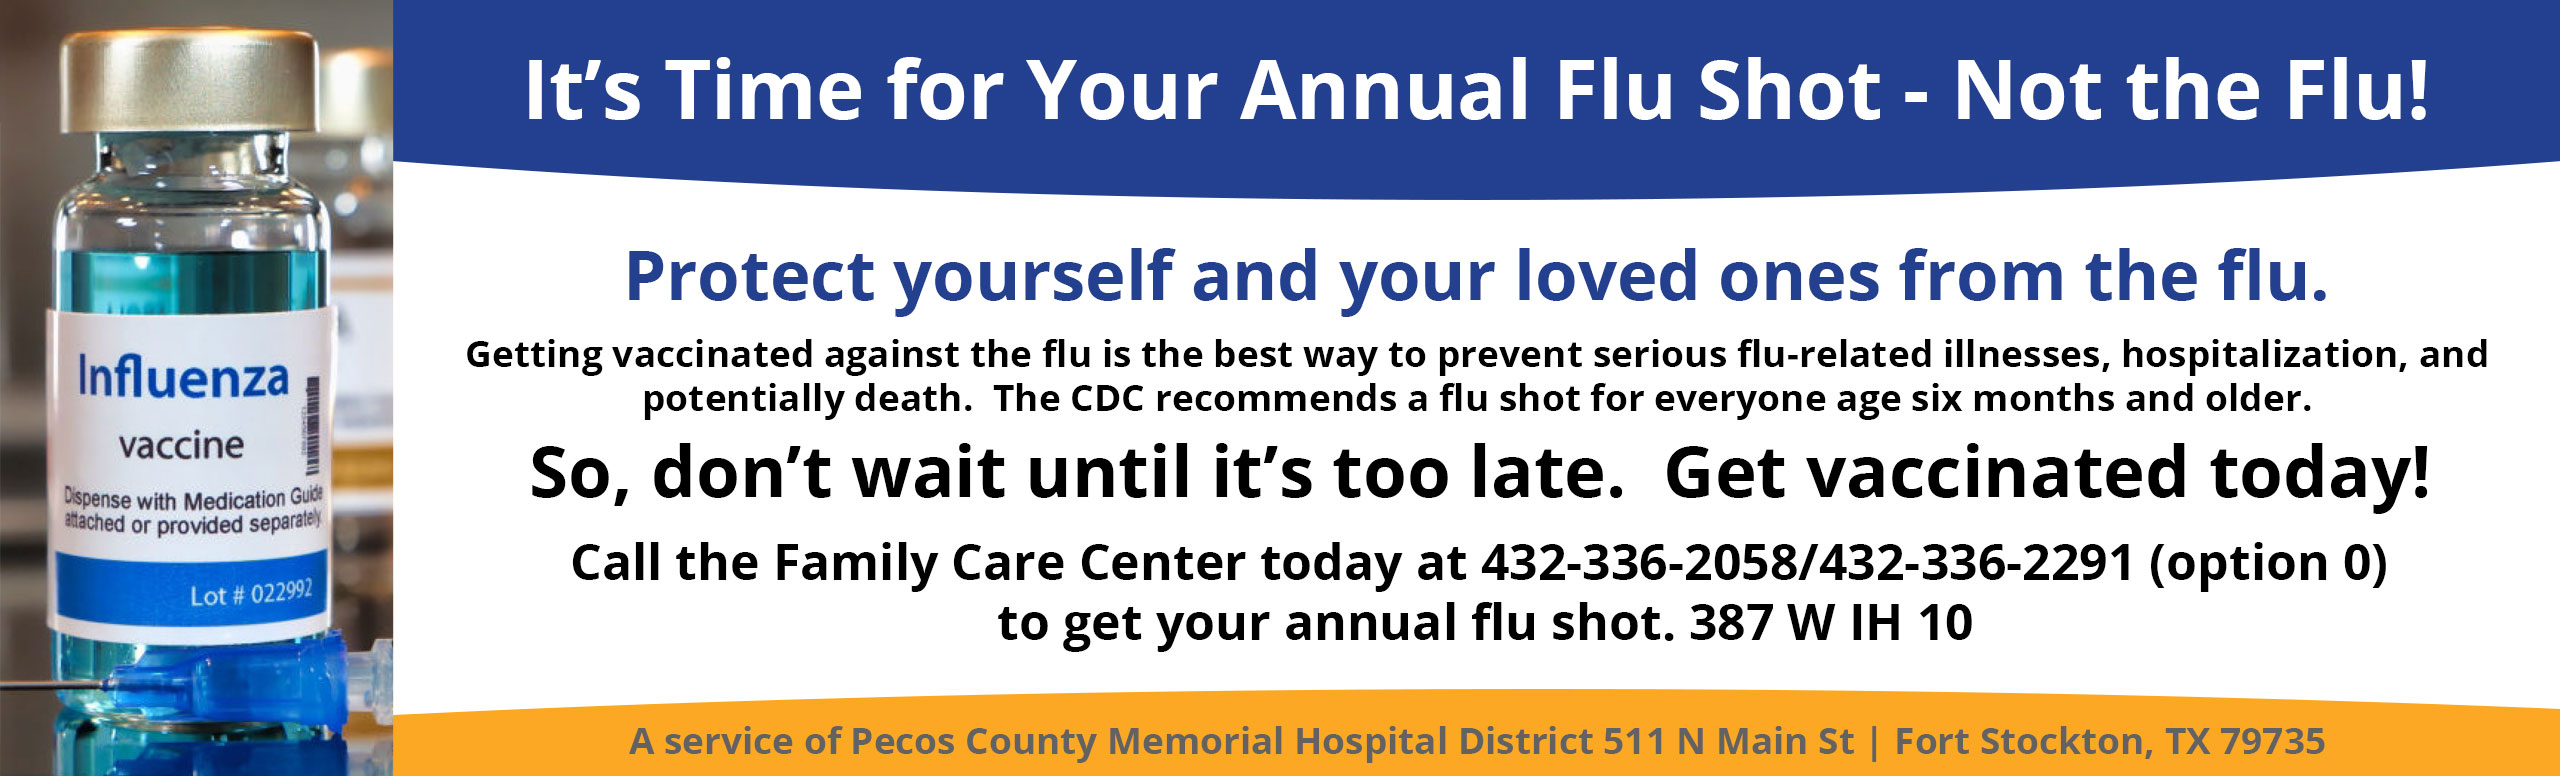 It's time for Your Annual Flu Shot- Not the flu!
Protect yourself and your loved ones from the flu.
Getting vaccinated against the flu is the best way to prevent serious flu-related illnesses, hospitalization, and potentially death. The CDC recommends a flu shot for everyone age six months and older.
So, don't wait until it's too late. Get vaccinated today!
Call the Family Care Center today at 432-336-2058/432-336-2291 (option 0) to get your annual flu shot. 387 W IH 10

*A service of Pecos County Memorial Hospital 511 N Main Street | Fort Stockton, TX 79735